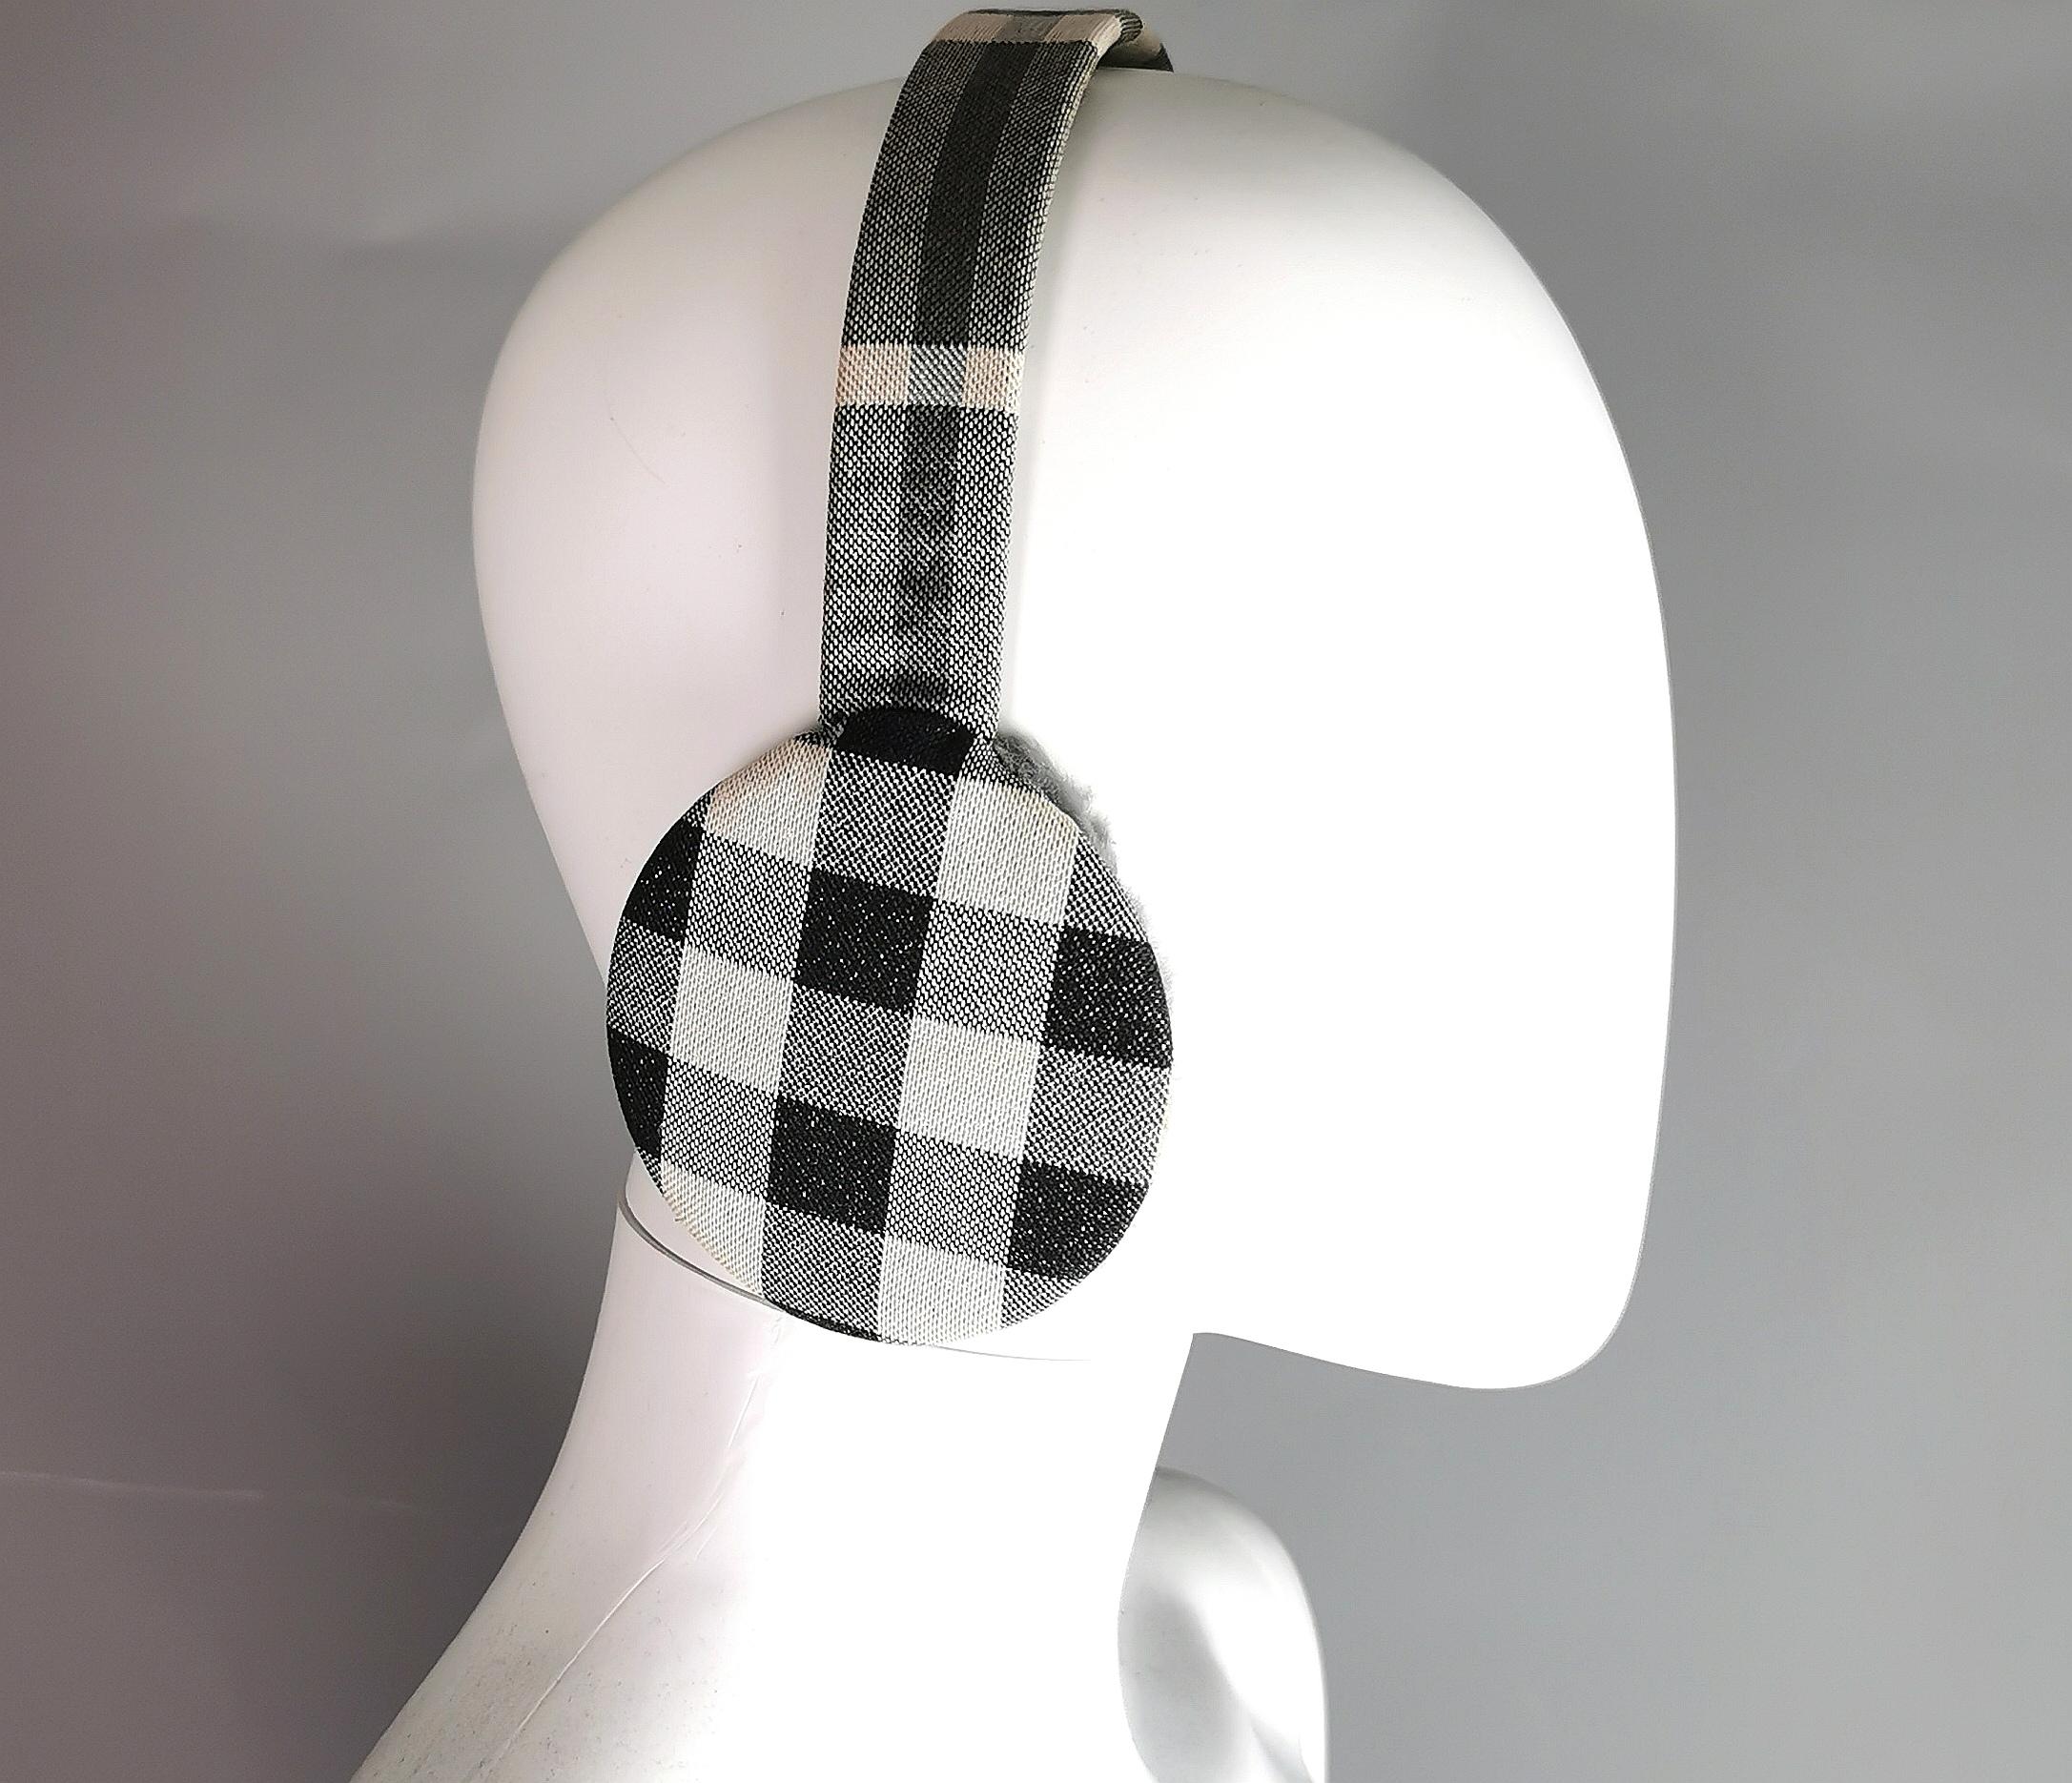 A stylish pair of vintage Burberry ear muffs.

Keep warm in style with this lovely pair of ear muffs, they feature the signature Burberry check pattern in a muted grey, black and off white colour.

They have a soft grey faux fur lining to the ear